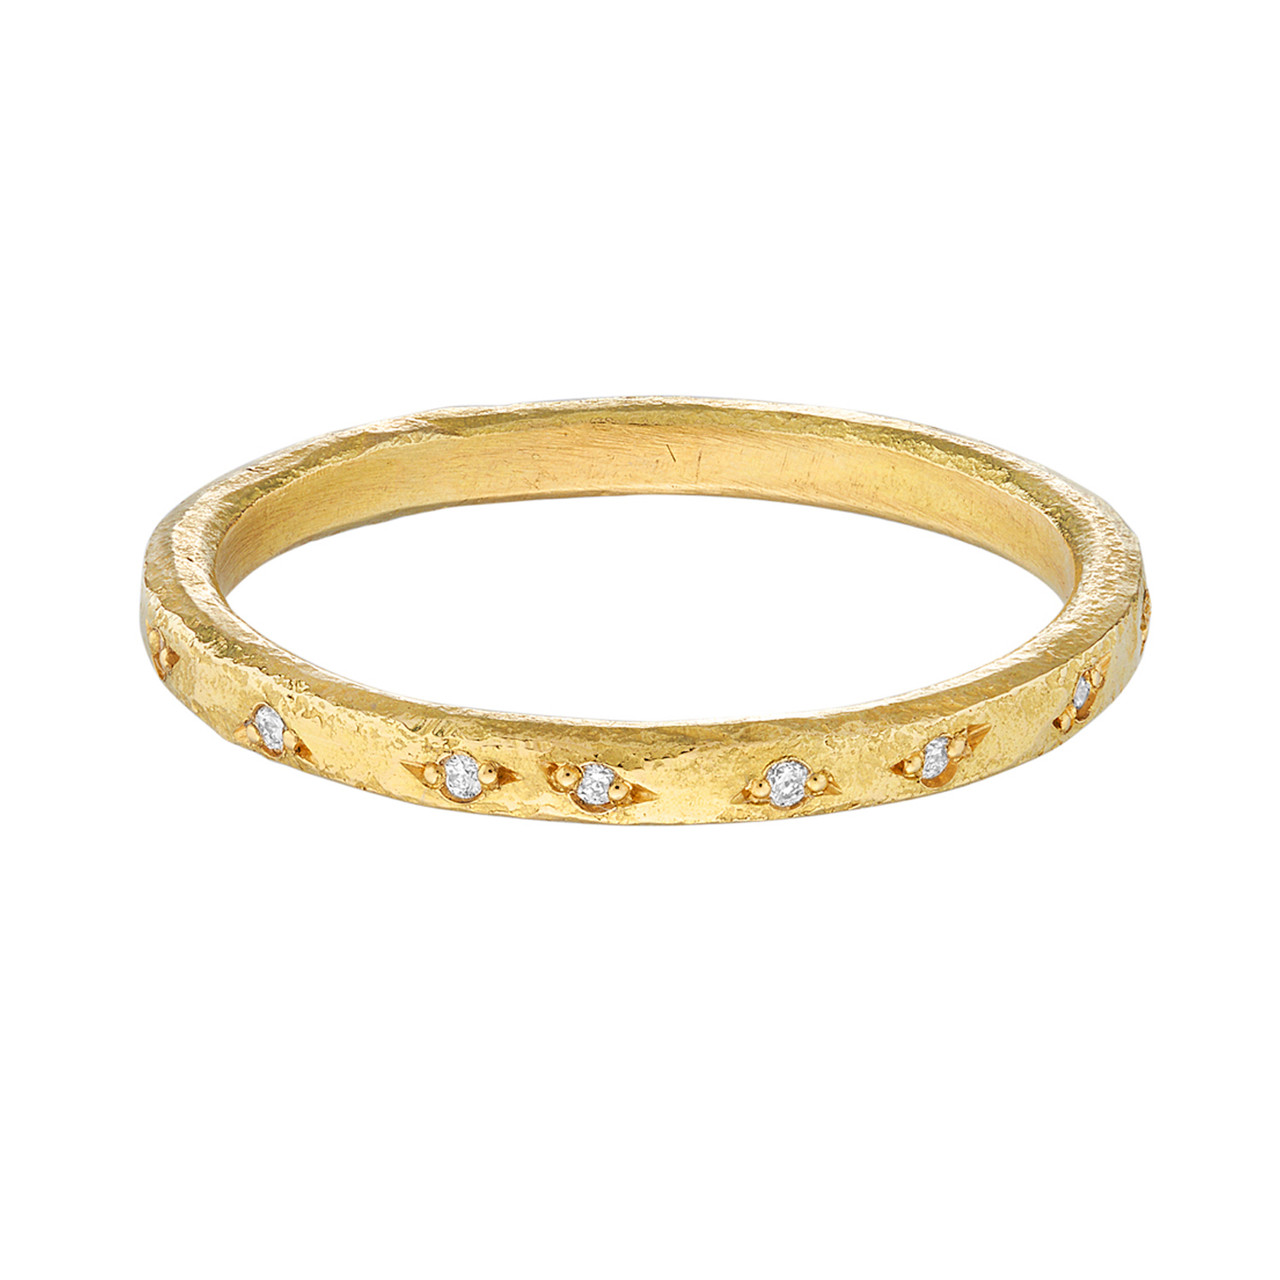 18ct Gold Textured Band with Scattered Diamonds, Shimara Carlow, tomfoolery